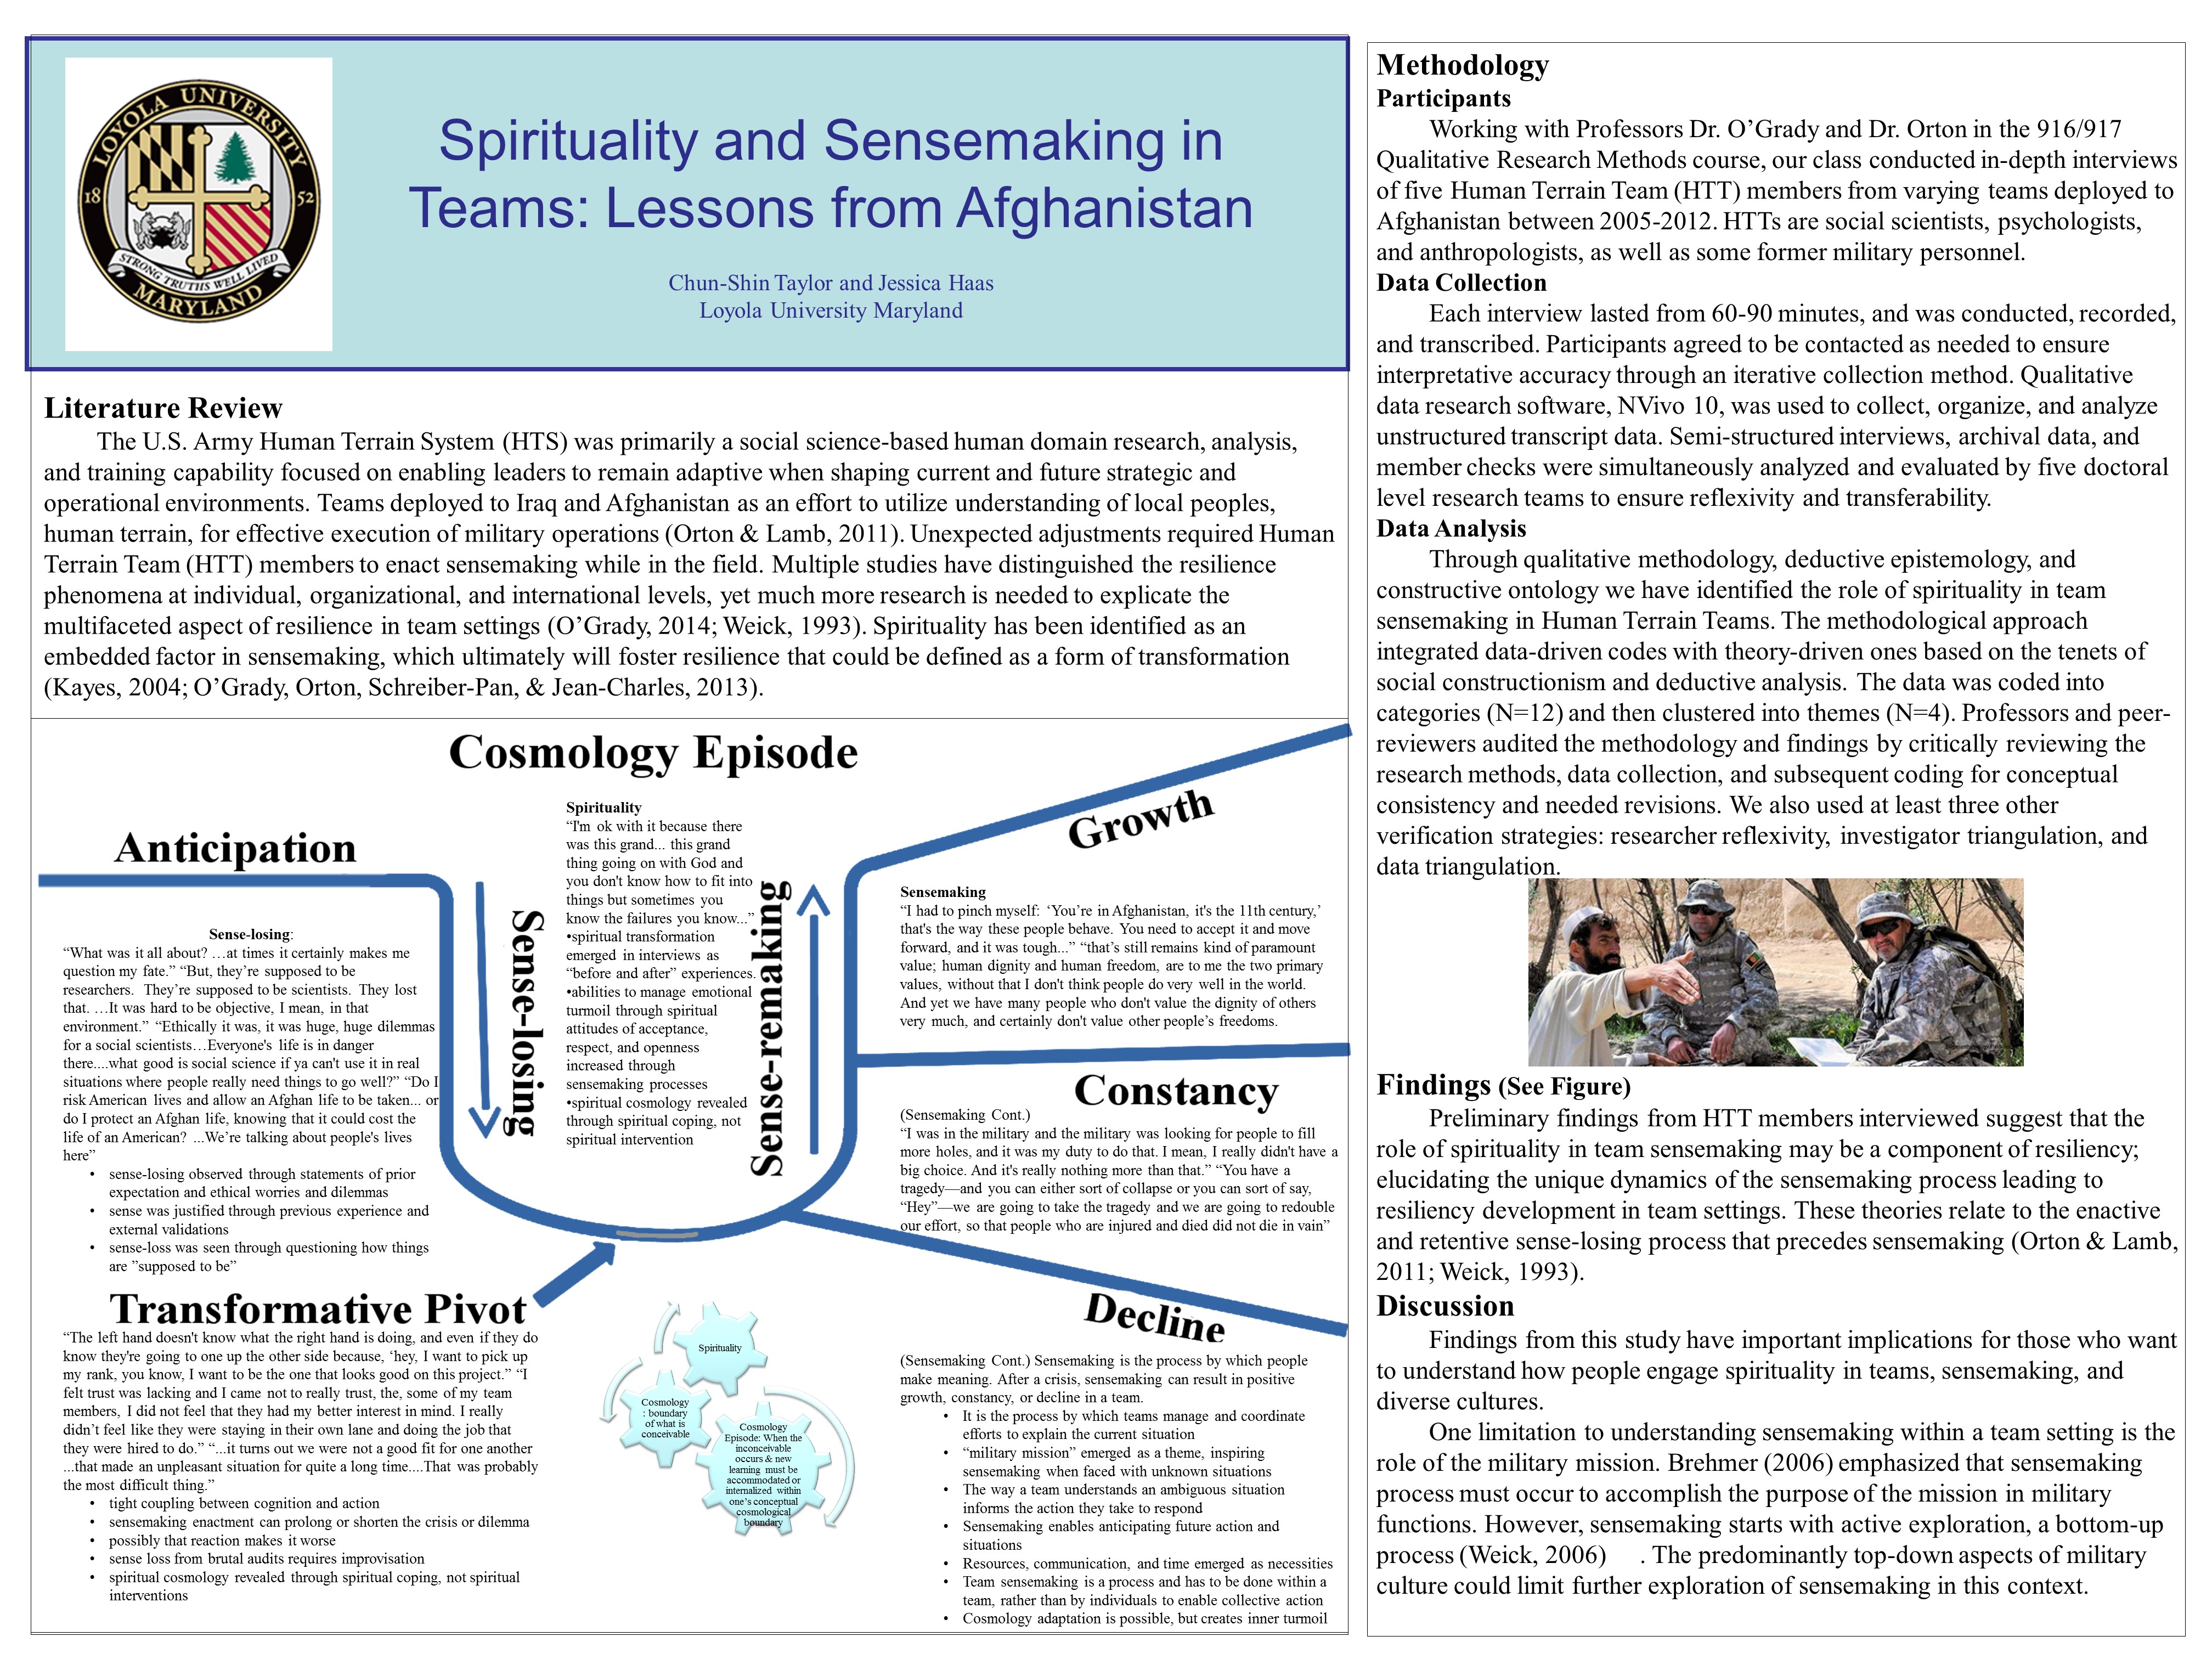 poster image: Spirituality and Sensemaking in Teams: Lessons from Afghanistan